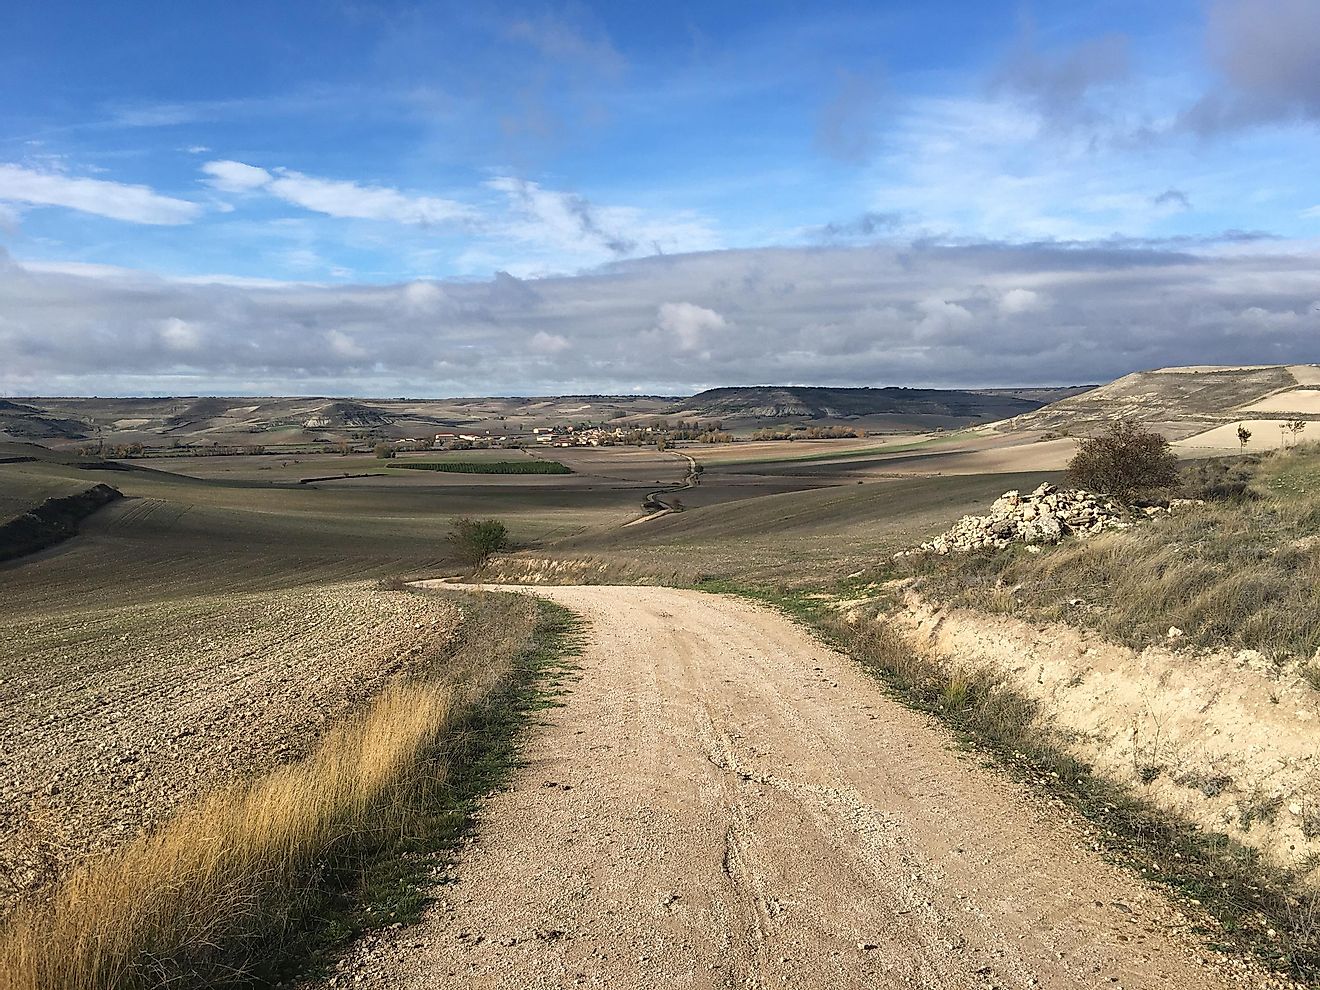 A long stretch of the Camino Francés leading to one of the intermittent small towns. A snapshot of the infamous meseta. Image: Andrew Douglas